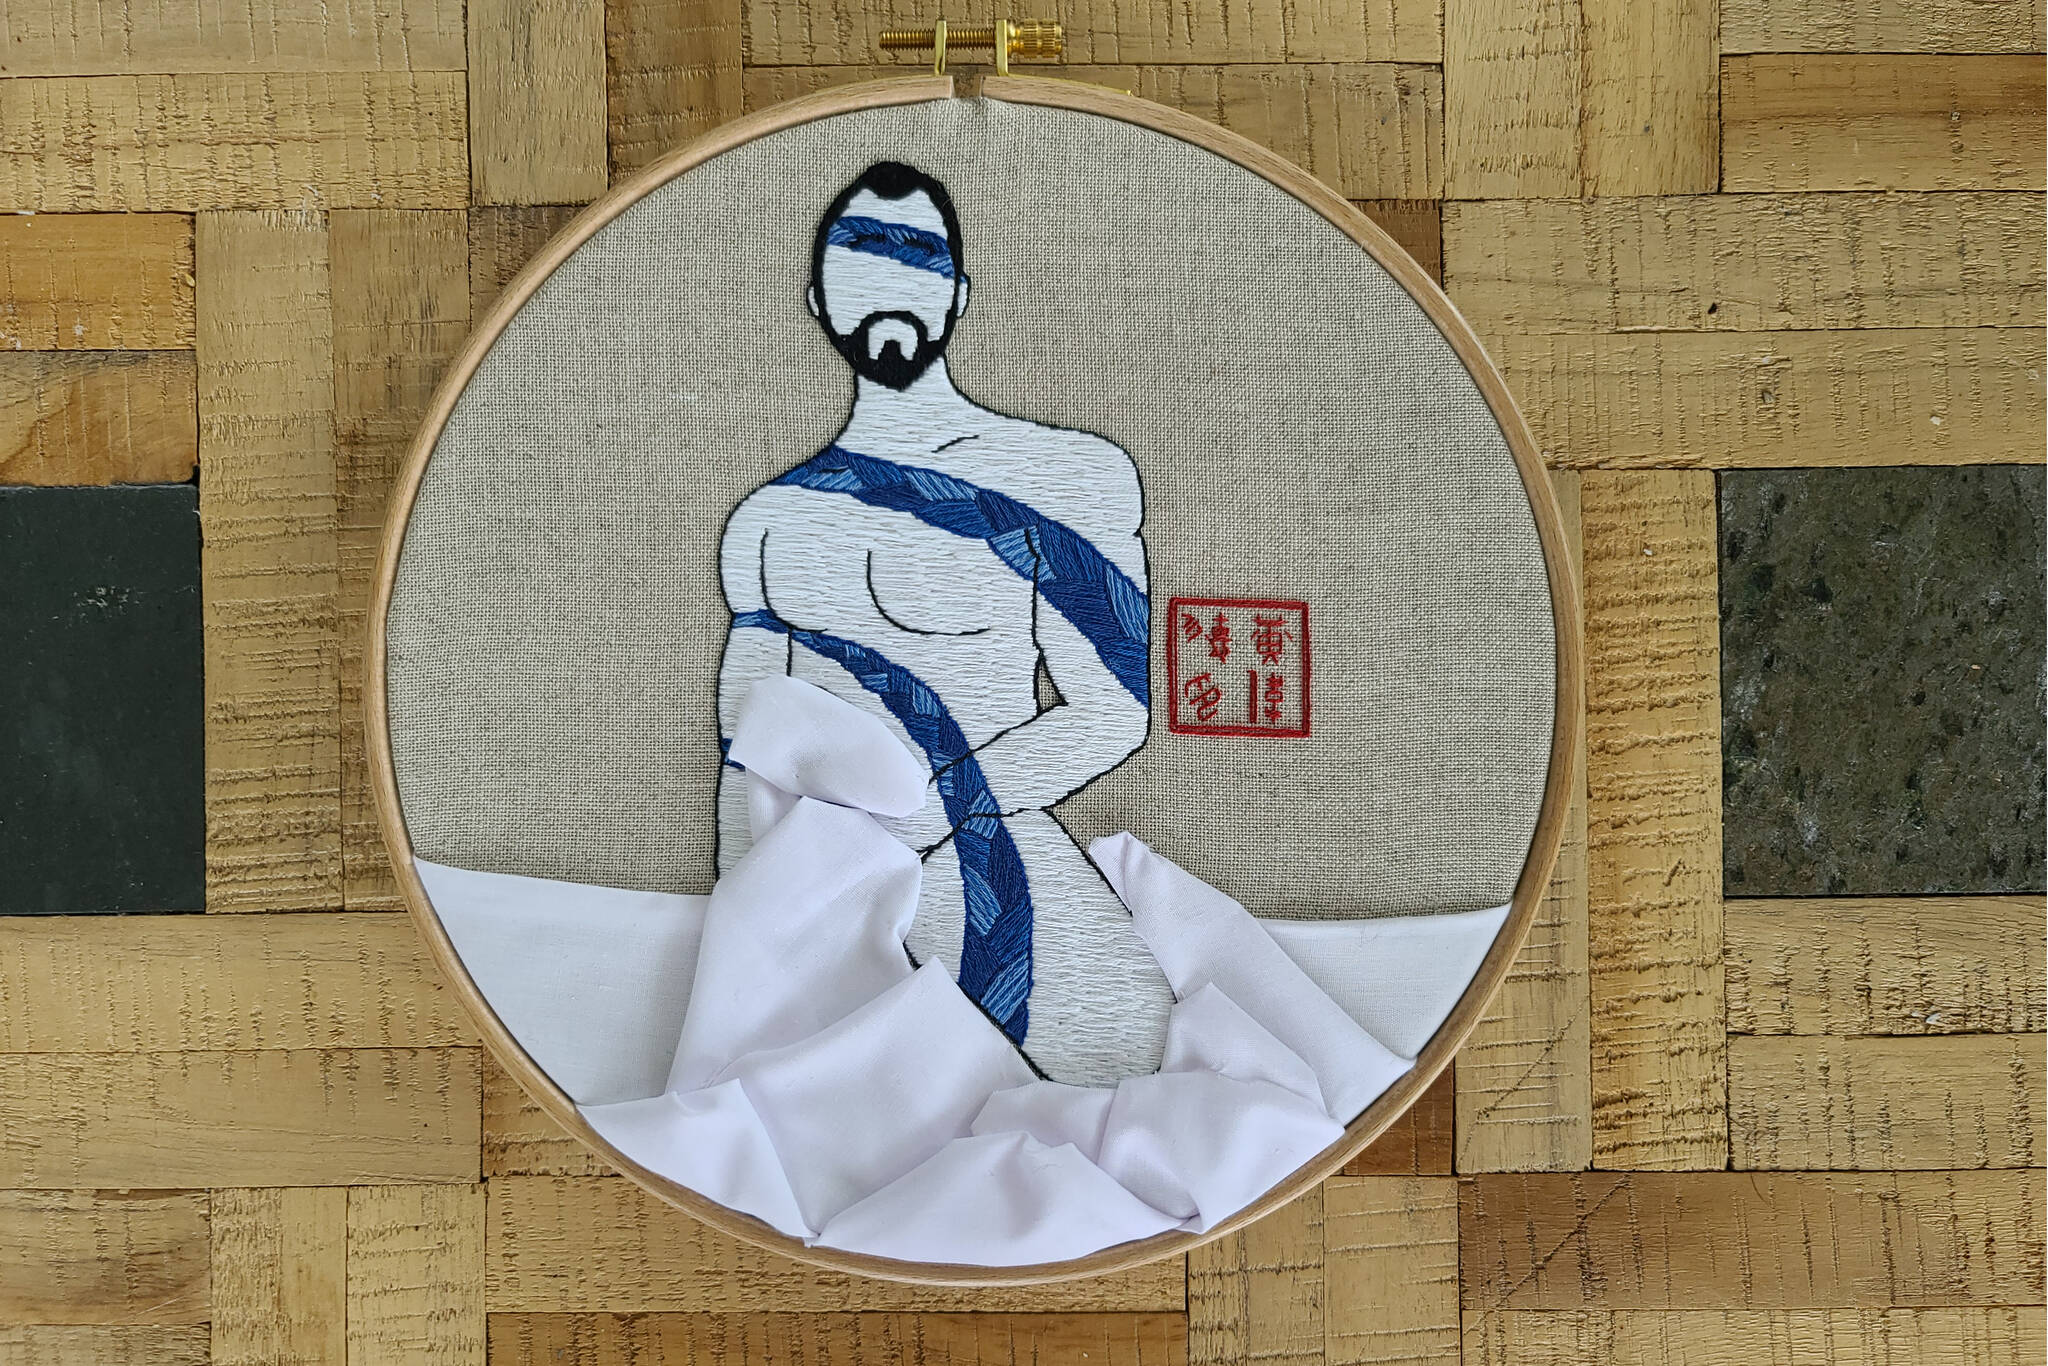 “Sweetgrass Porcelain” is a hand embroidery and linen on natural linen by ‘EMW’. The artwork is featured in the “By Us, For Us” report on sex workers in the Lower Mainland that was released April 12 2023. (Submitted photo)